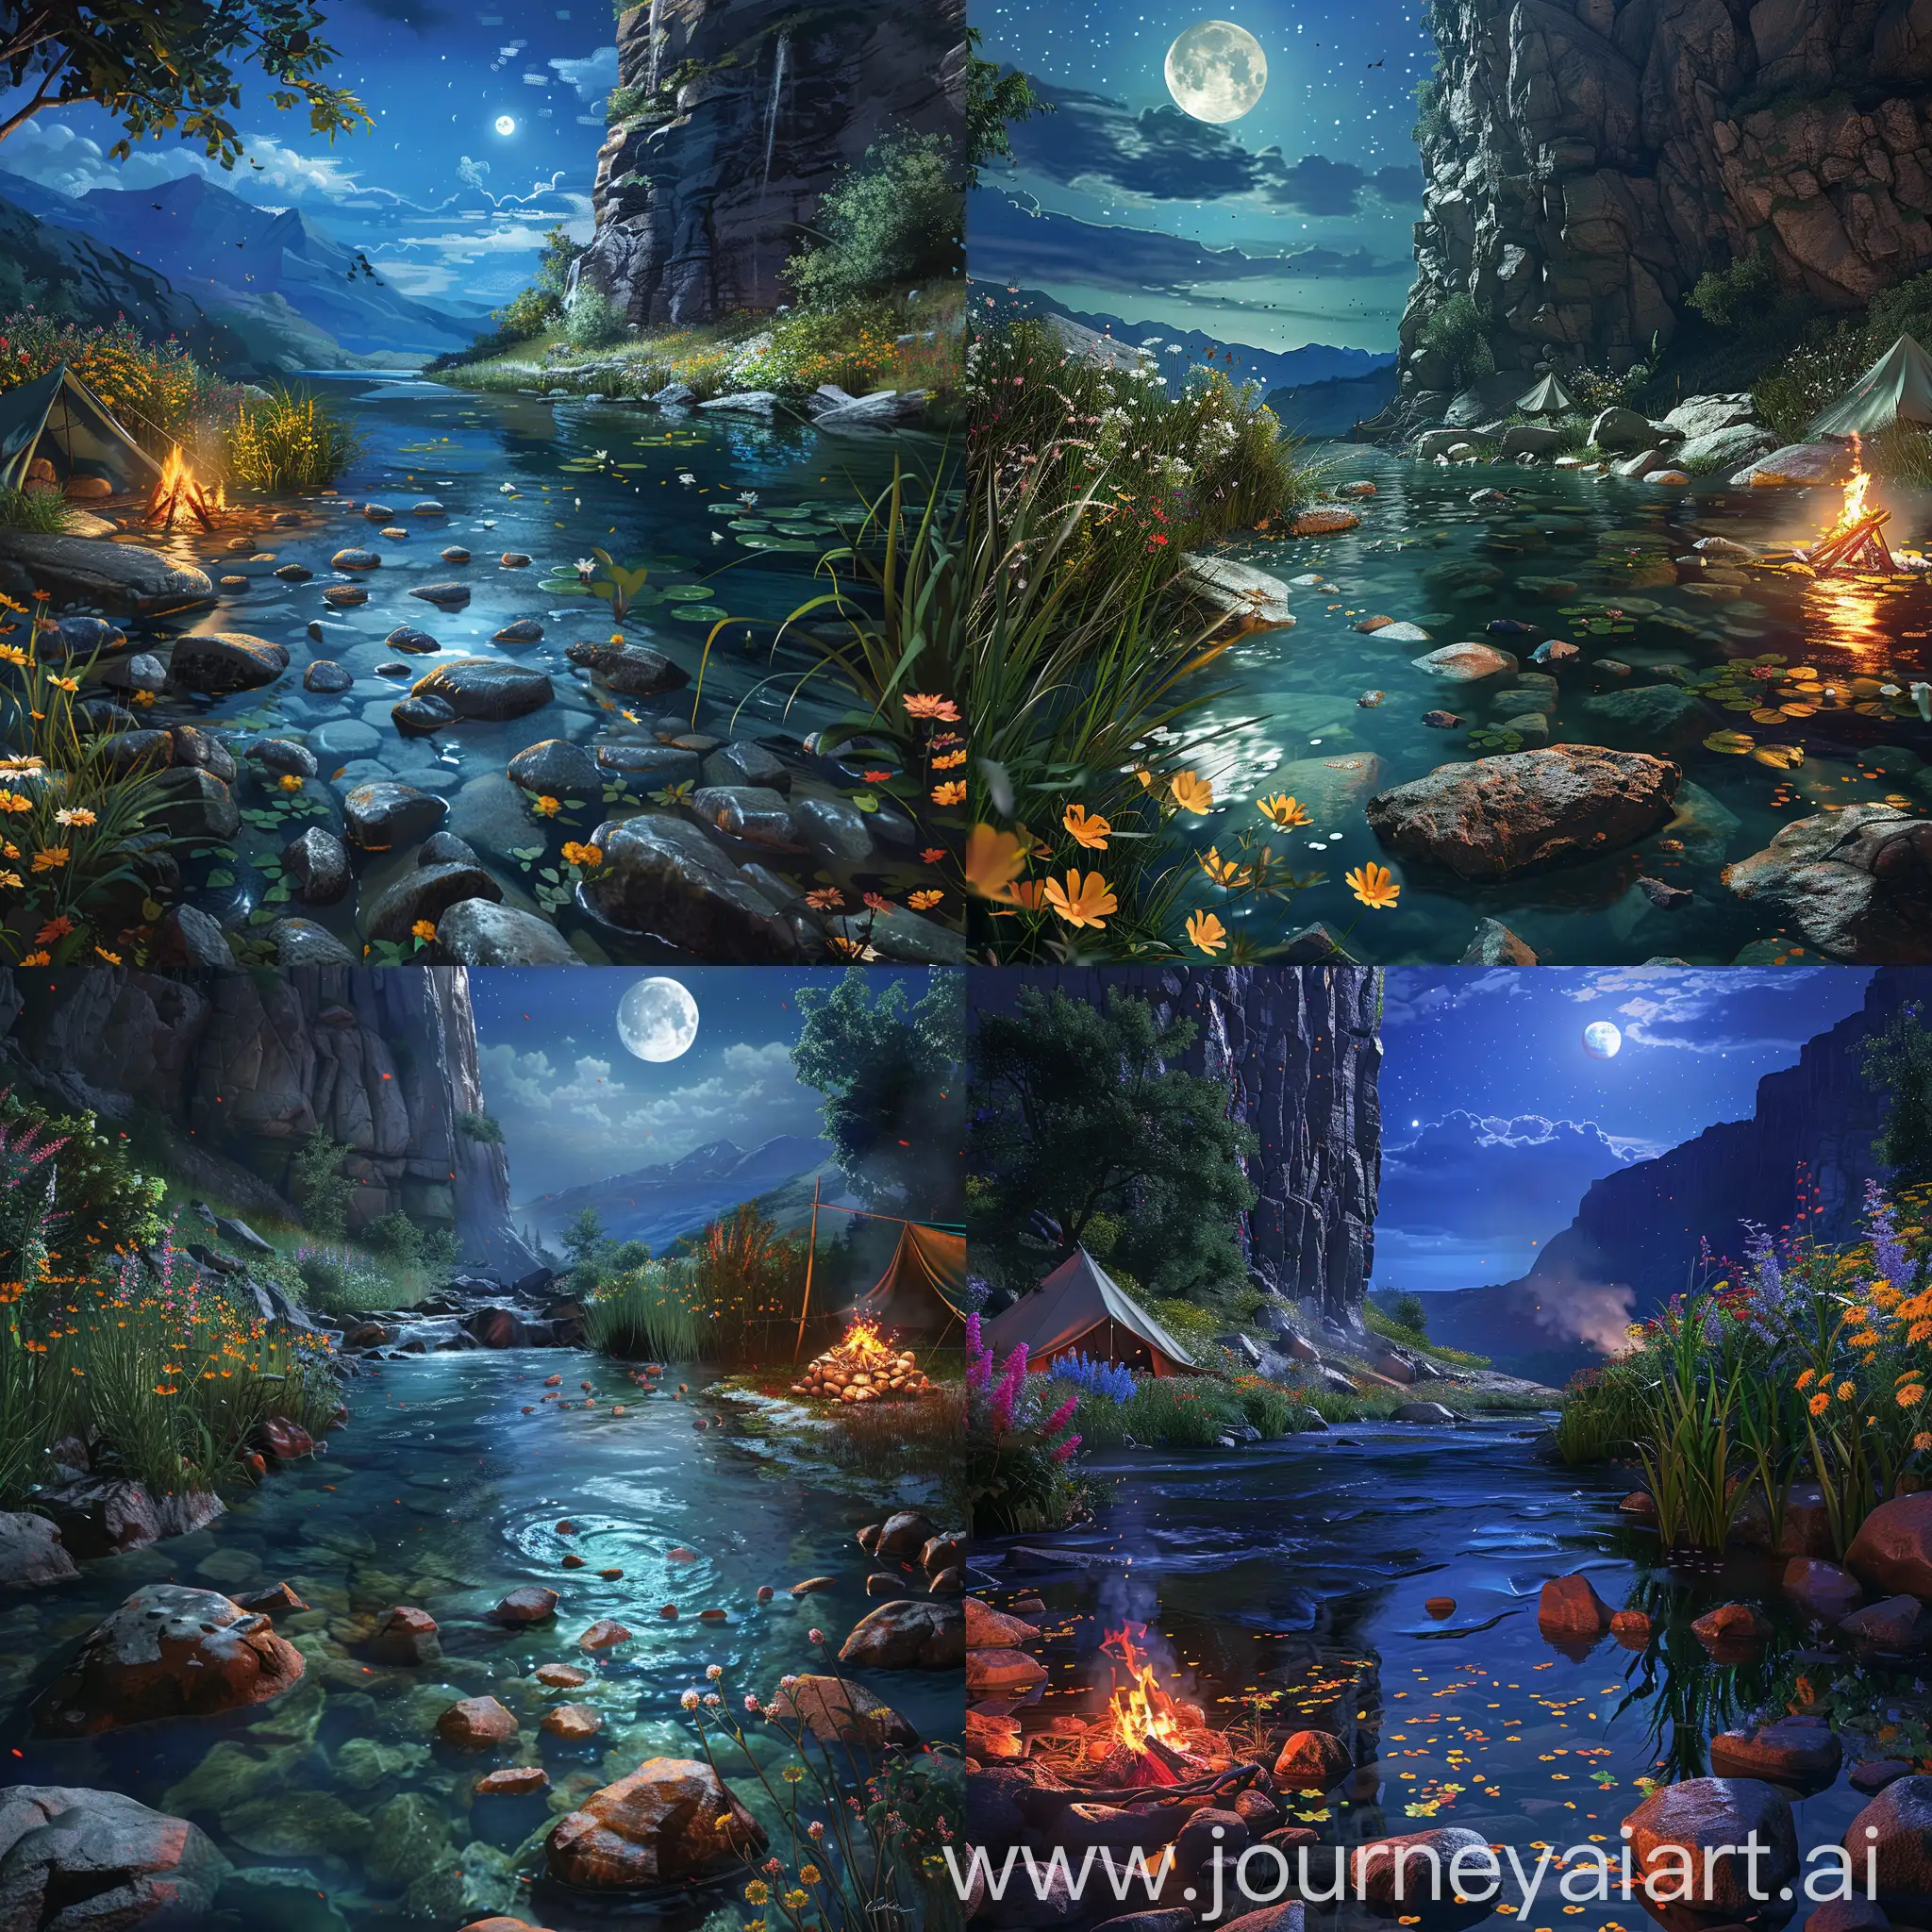 Uncharted game art style.a clear river with  rocks, beside is towerng cliff,wide shot,night time, full moon,flowers,grasses,bonefire beside the camping tent